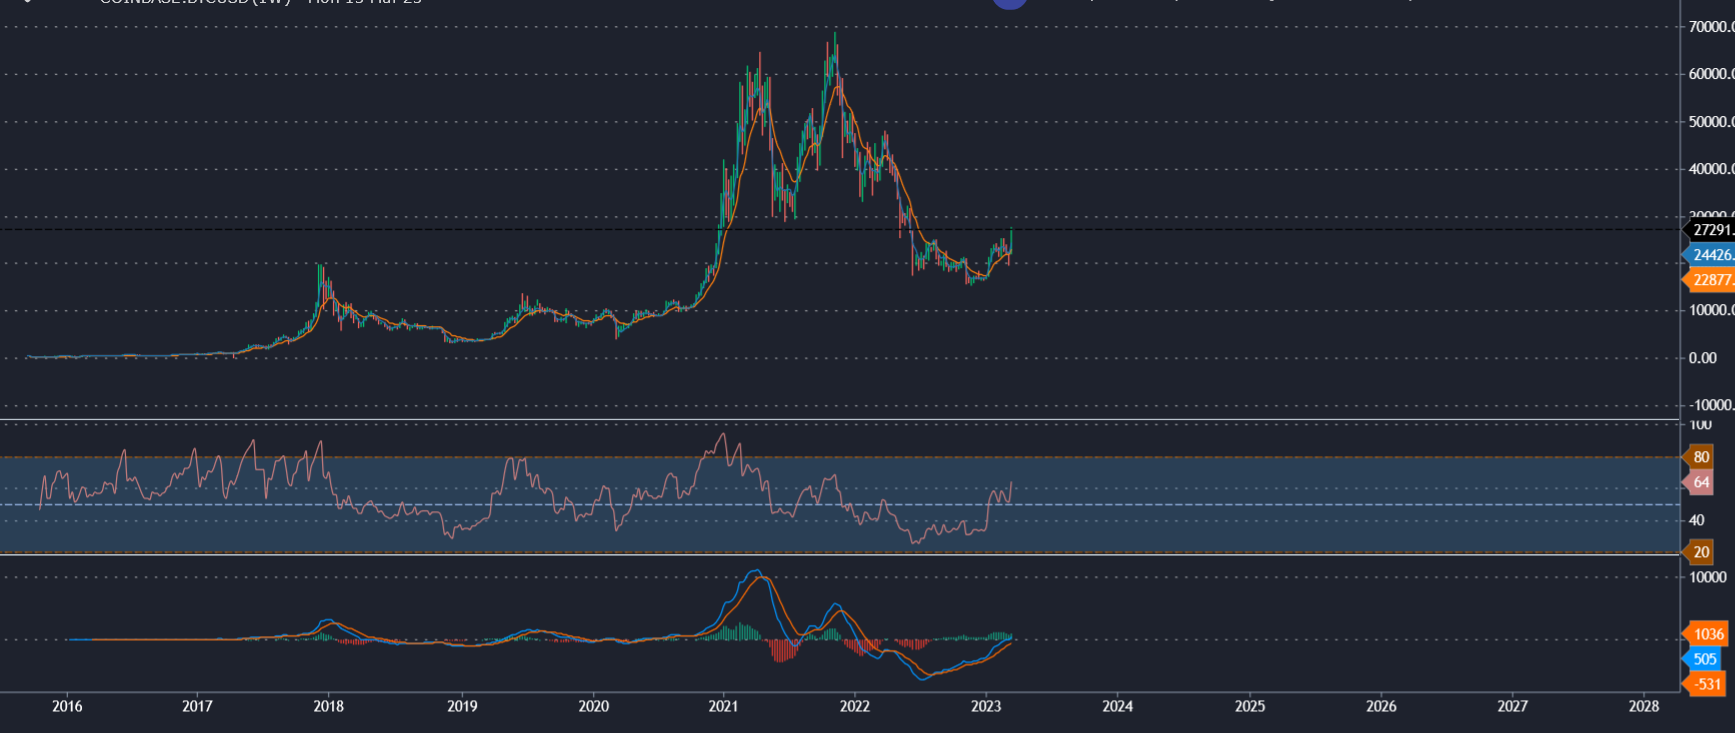 Why Is Bitcoin Price Going Up: BTC/USD Weekly chart showing the price – GoCharting